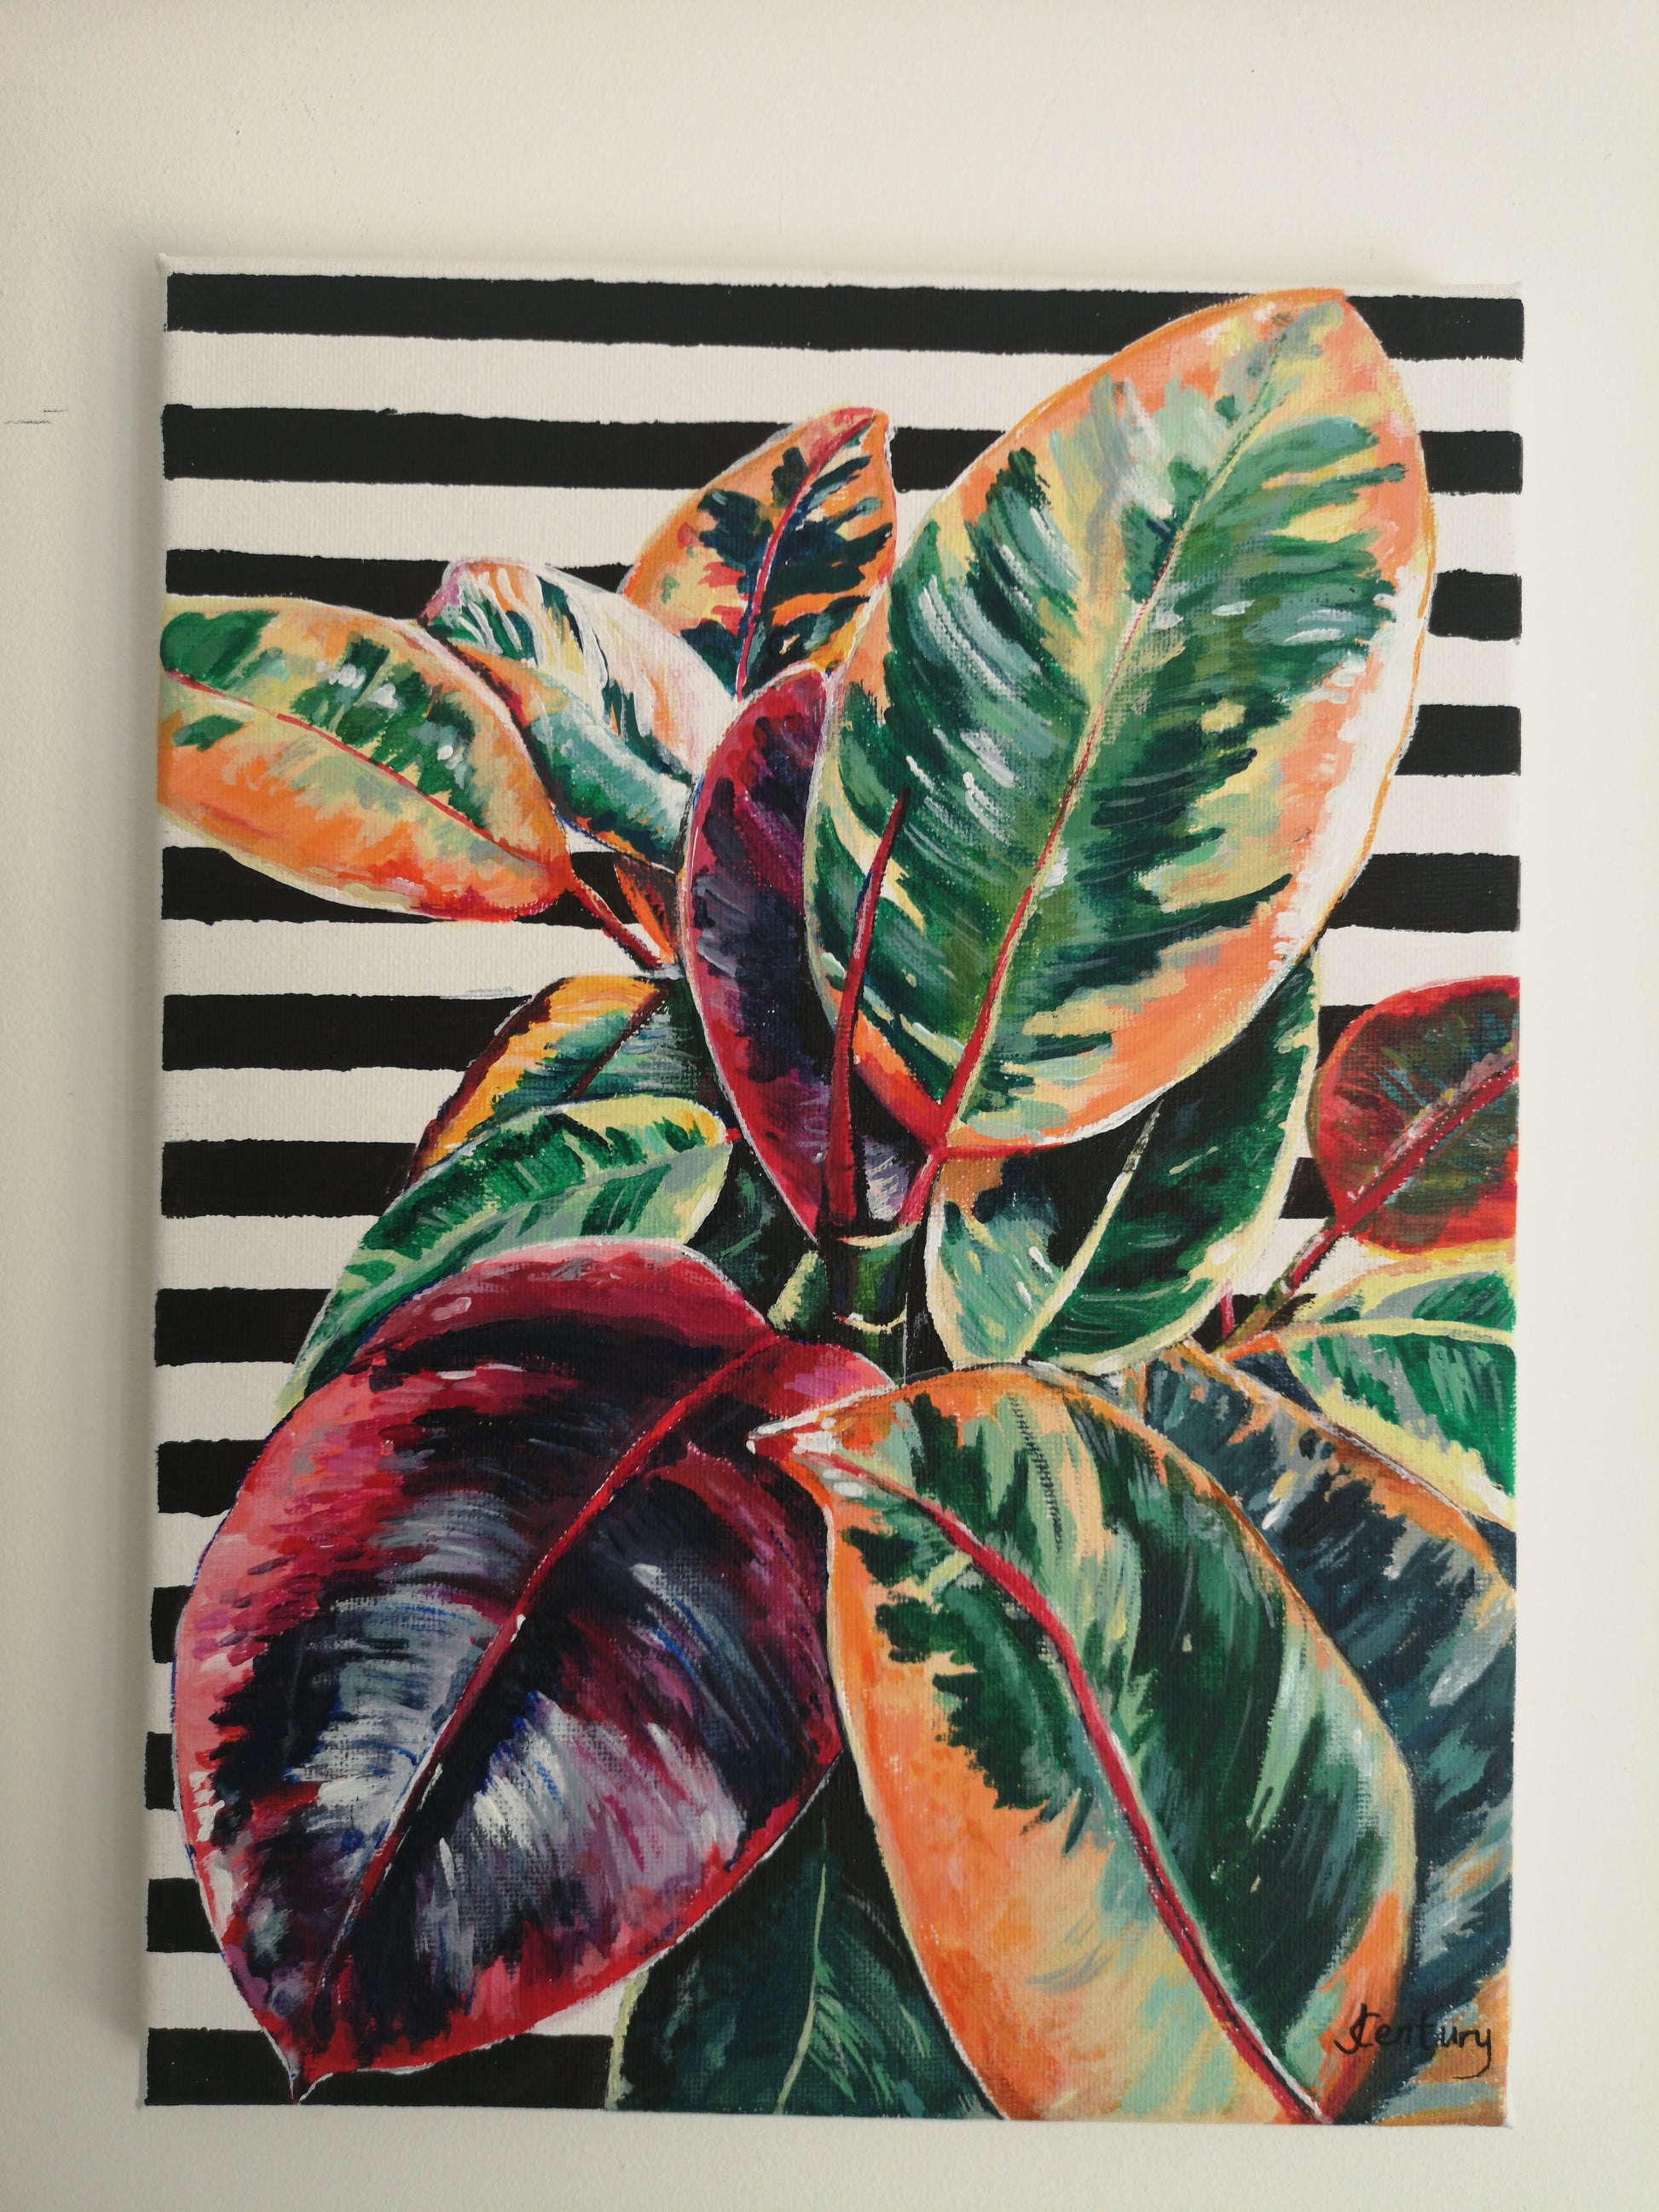 Original Plant painting Rubber Fig realistic acrylic painting on black and white striped pattern background A4 size with white frame hanging on white wall. Artwork by Judy Century.